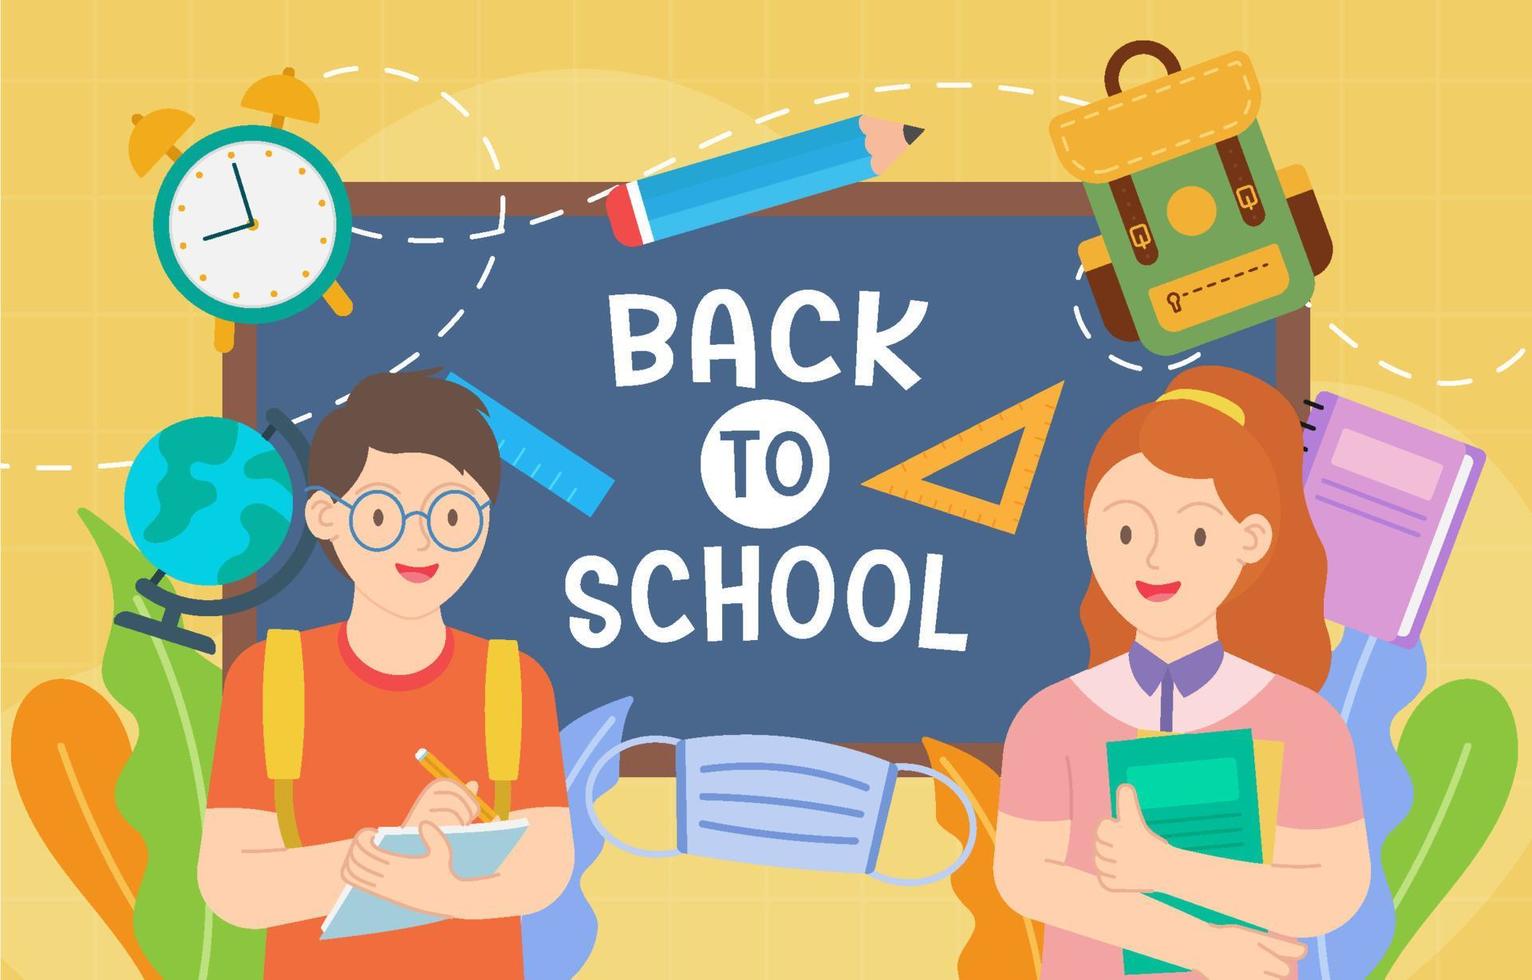 Back to School with New Normal Activity Illustration vector